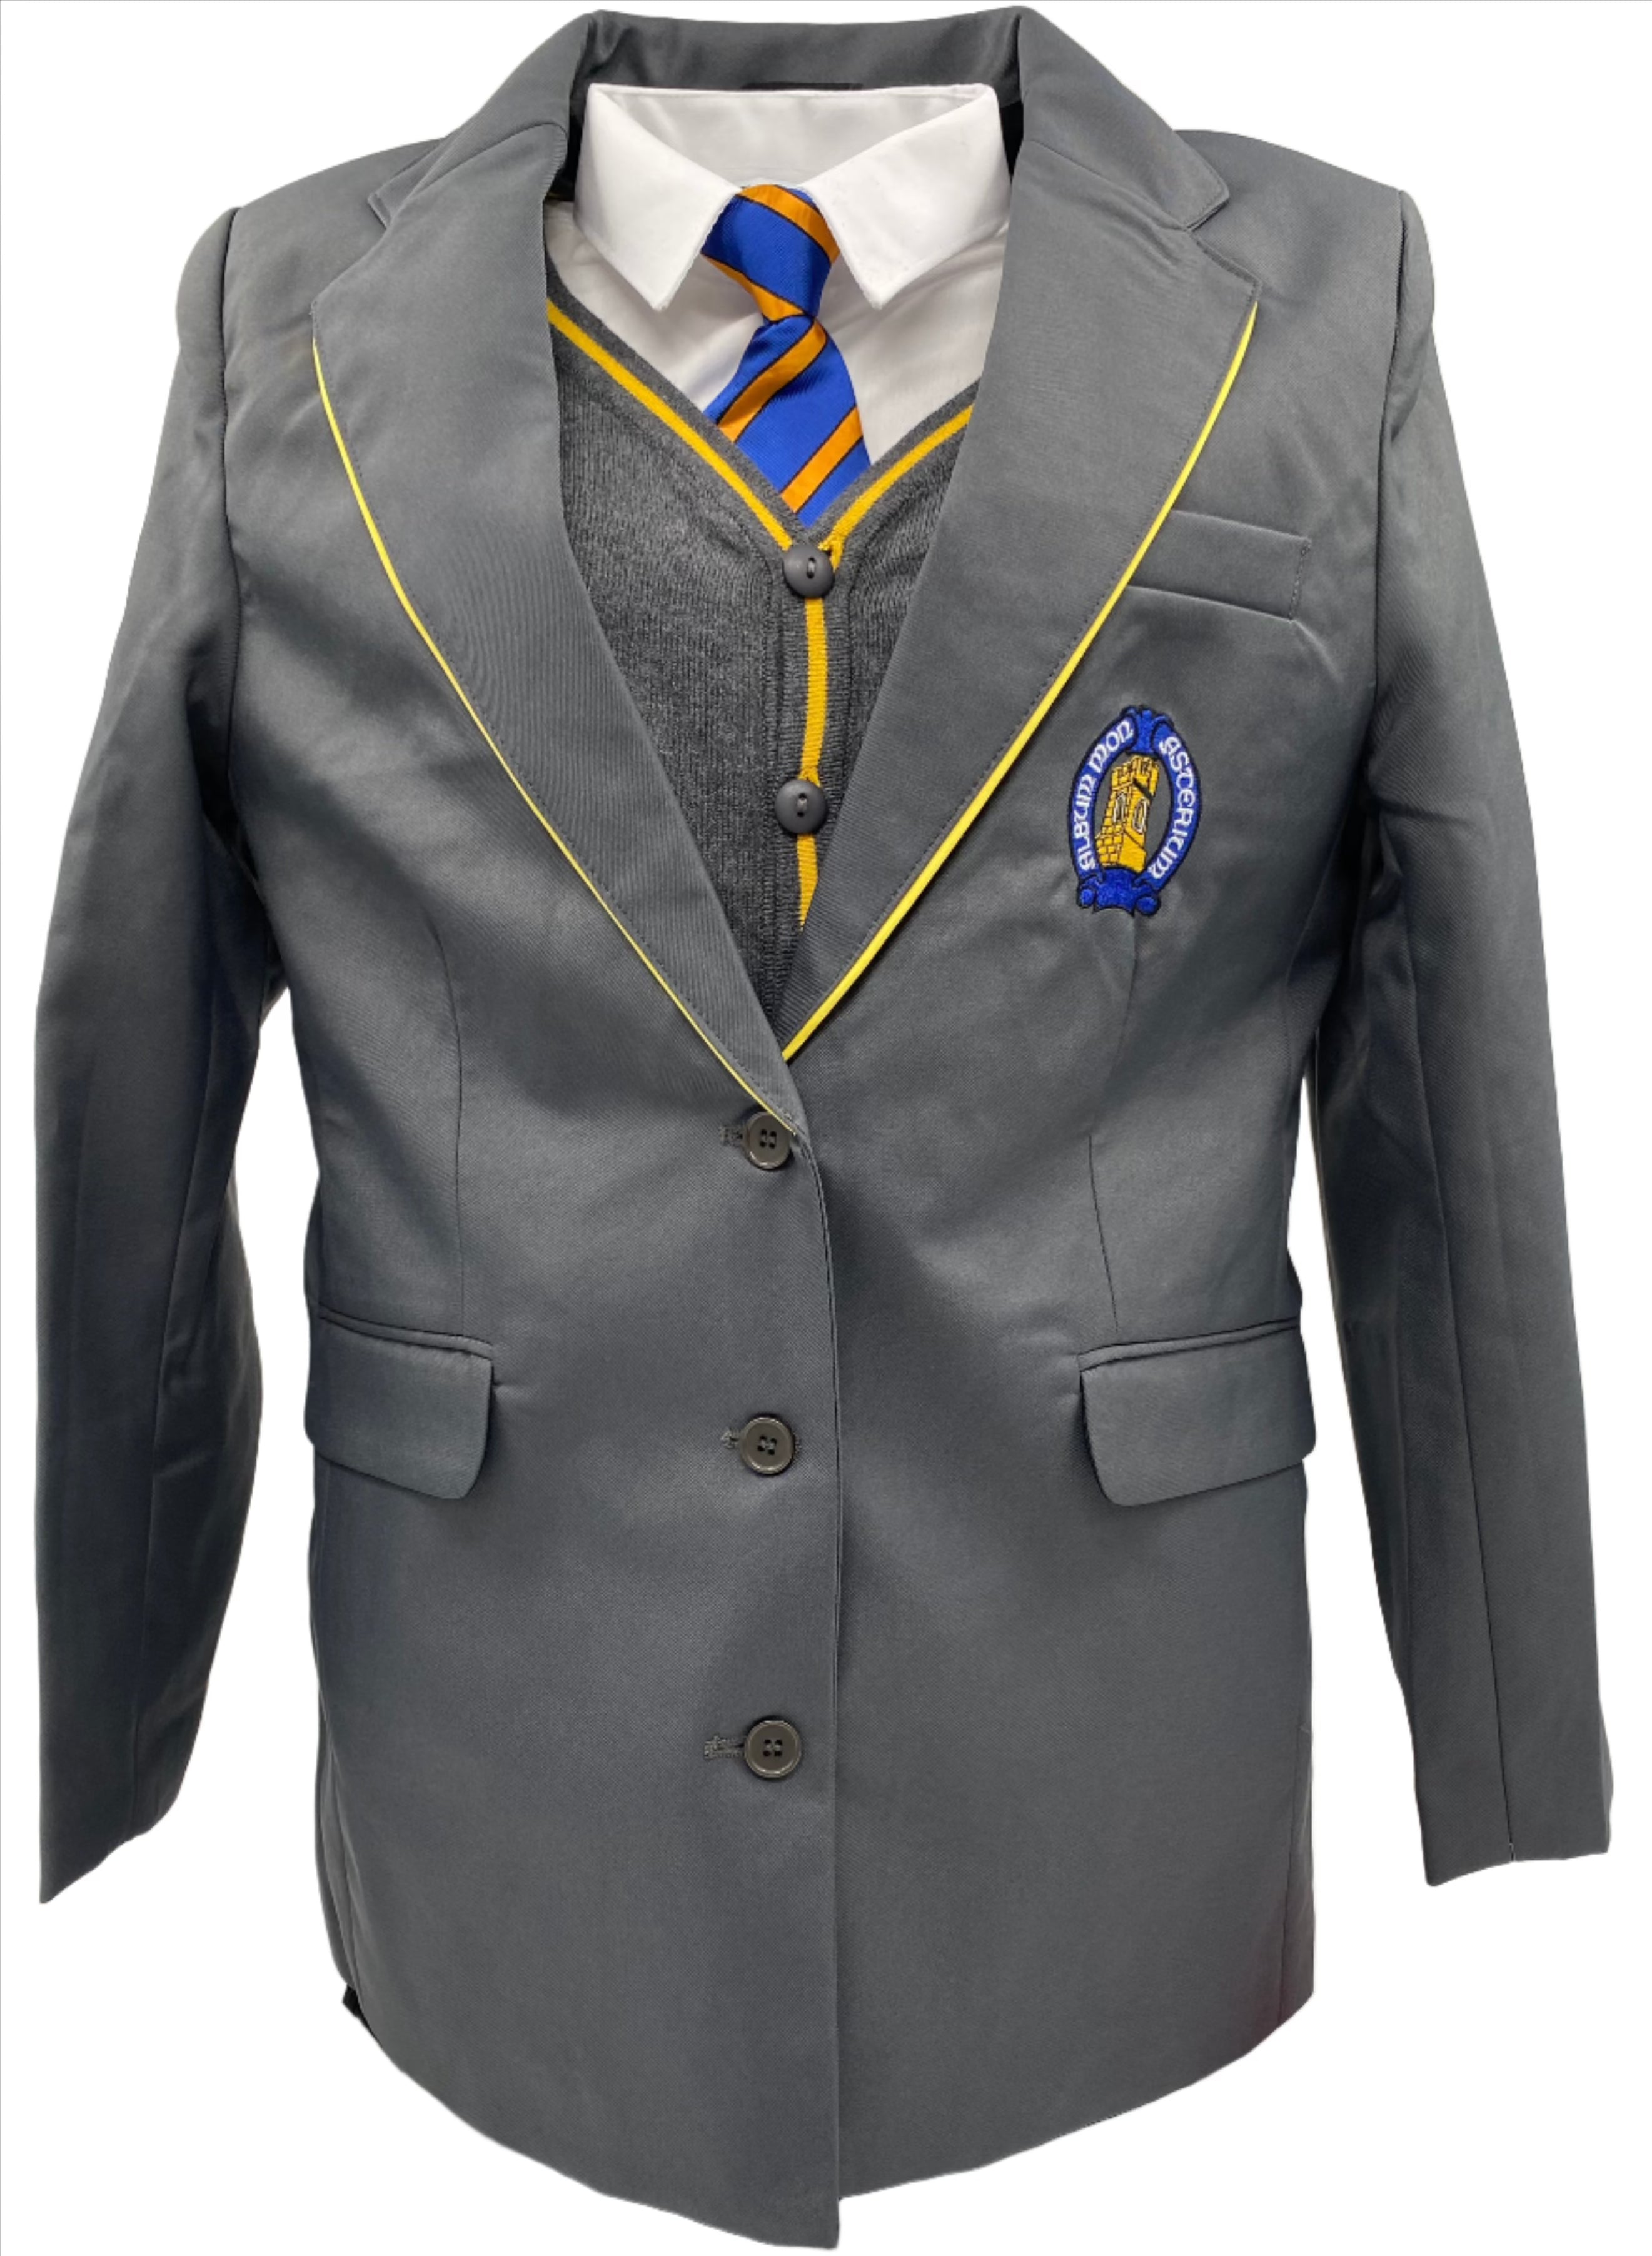 Whitchurch High School Blazer (Fitted)